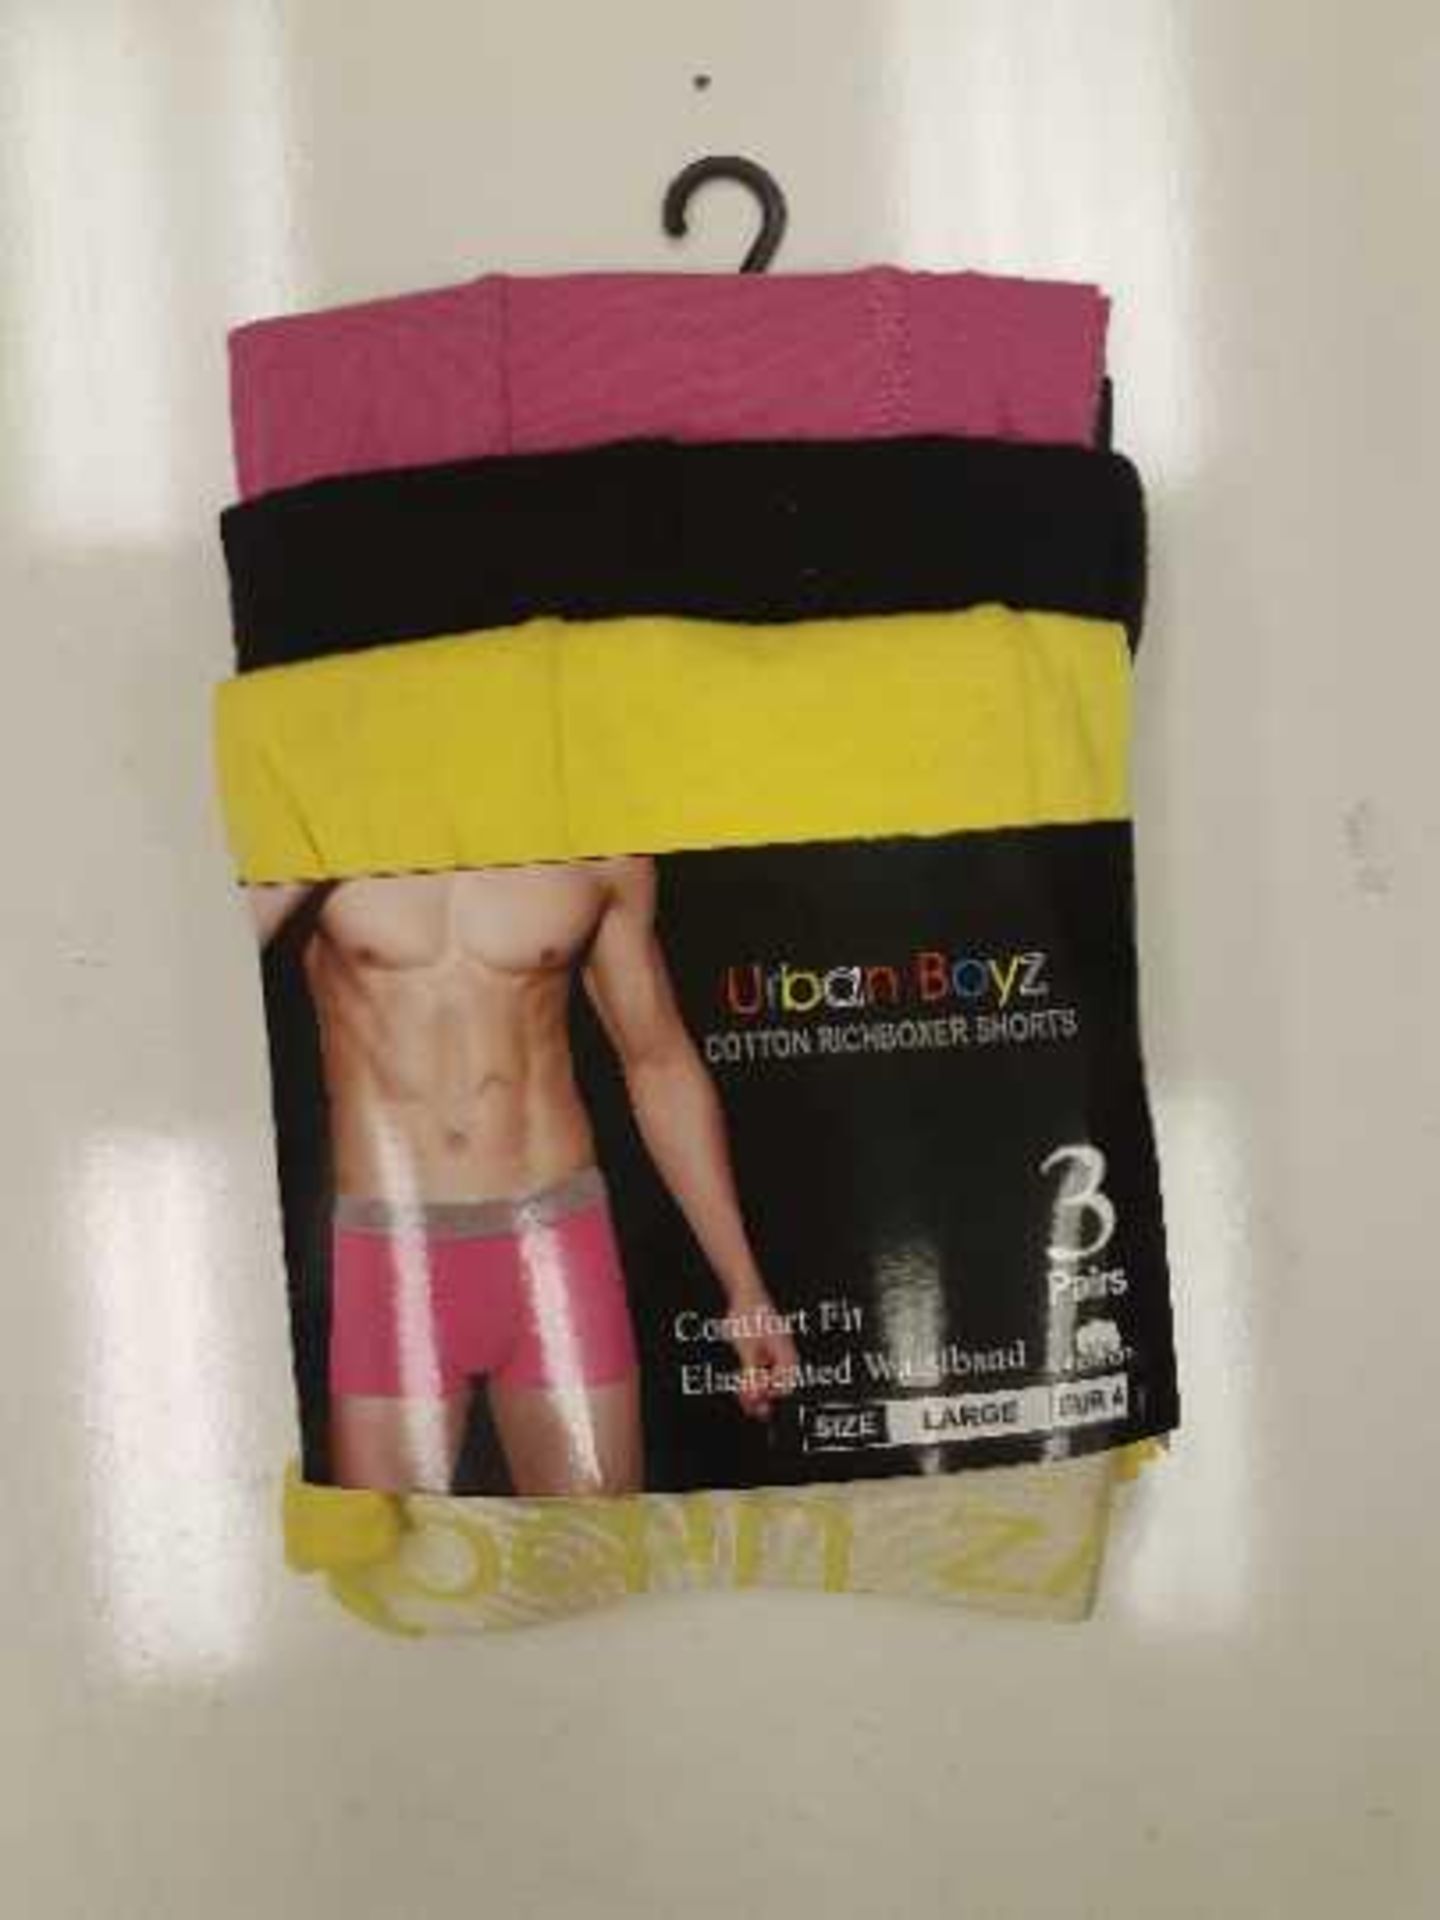 3 Pairs Of Urban Boyz Cotton Richboxer Shorts Comfort Fit with Elasticated Waist Band. Size L. New